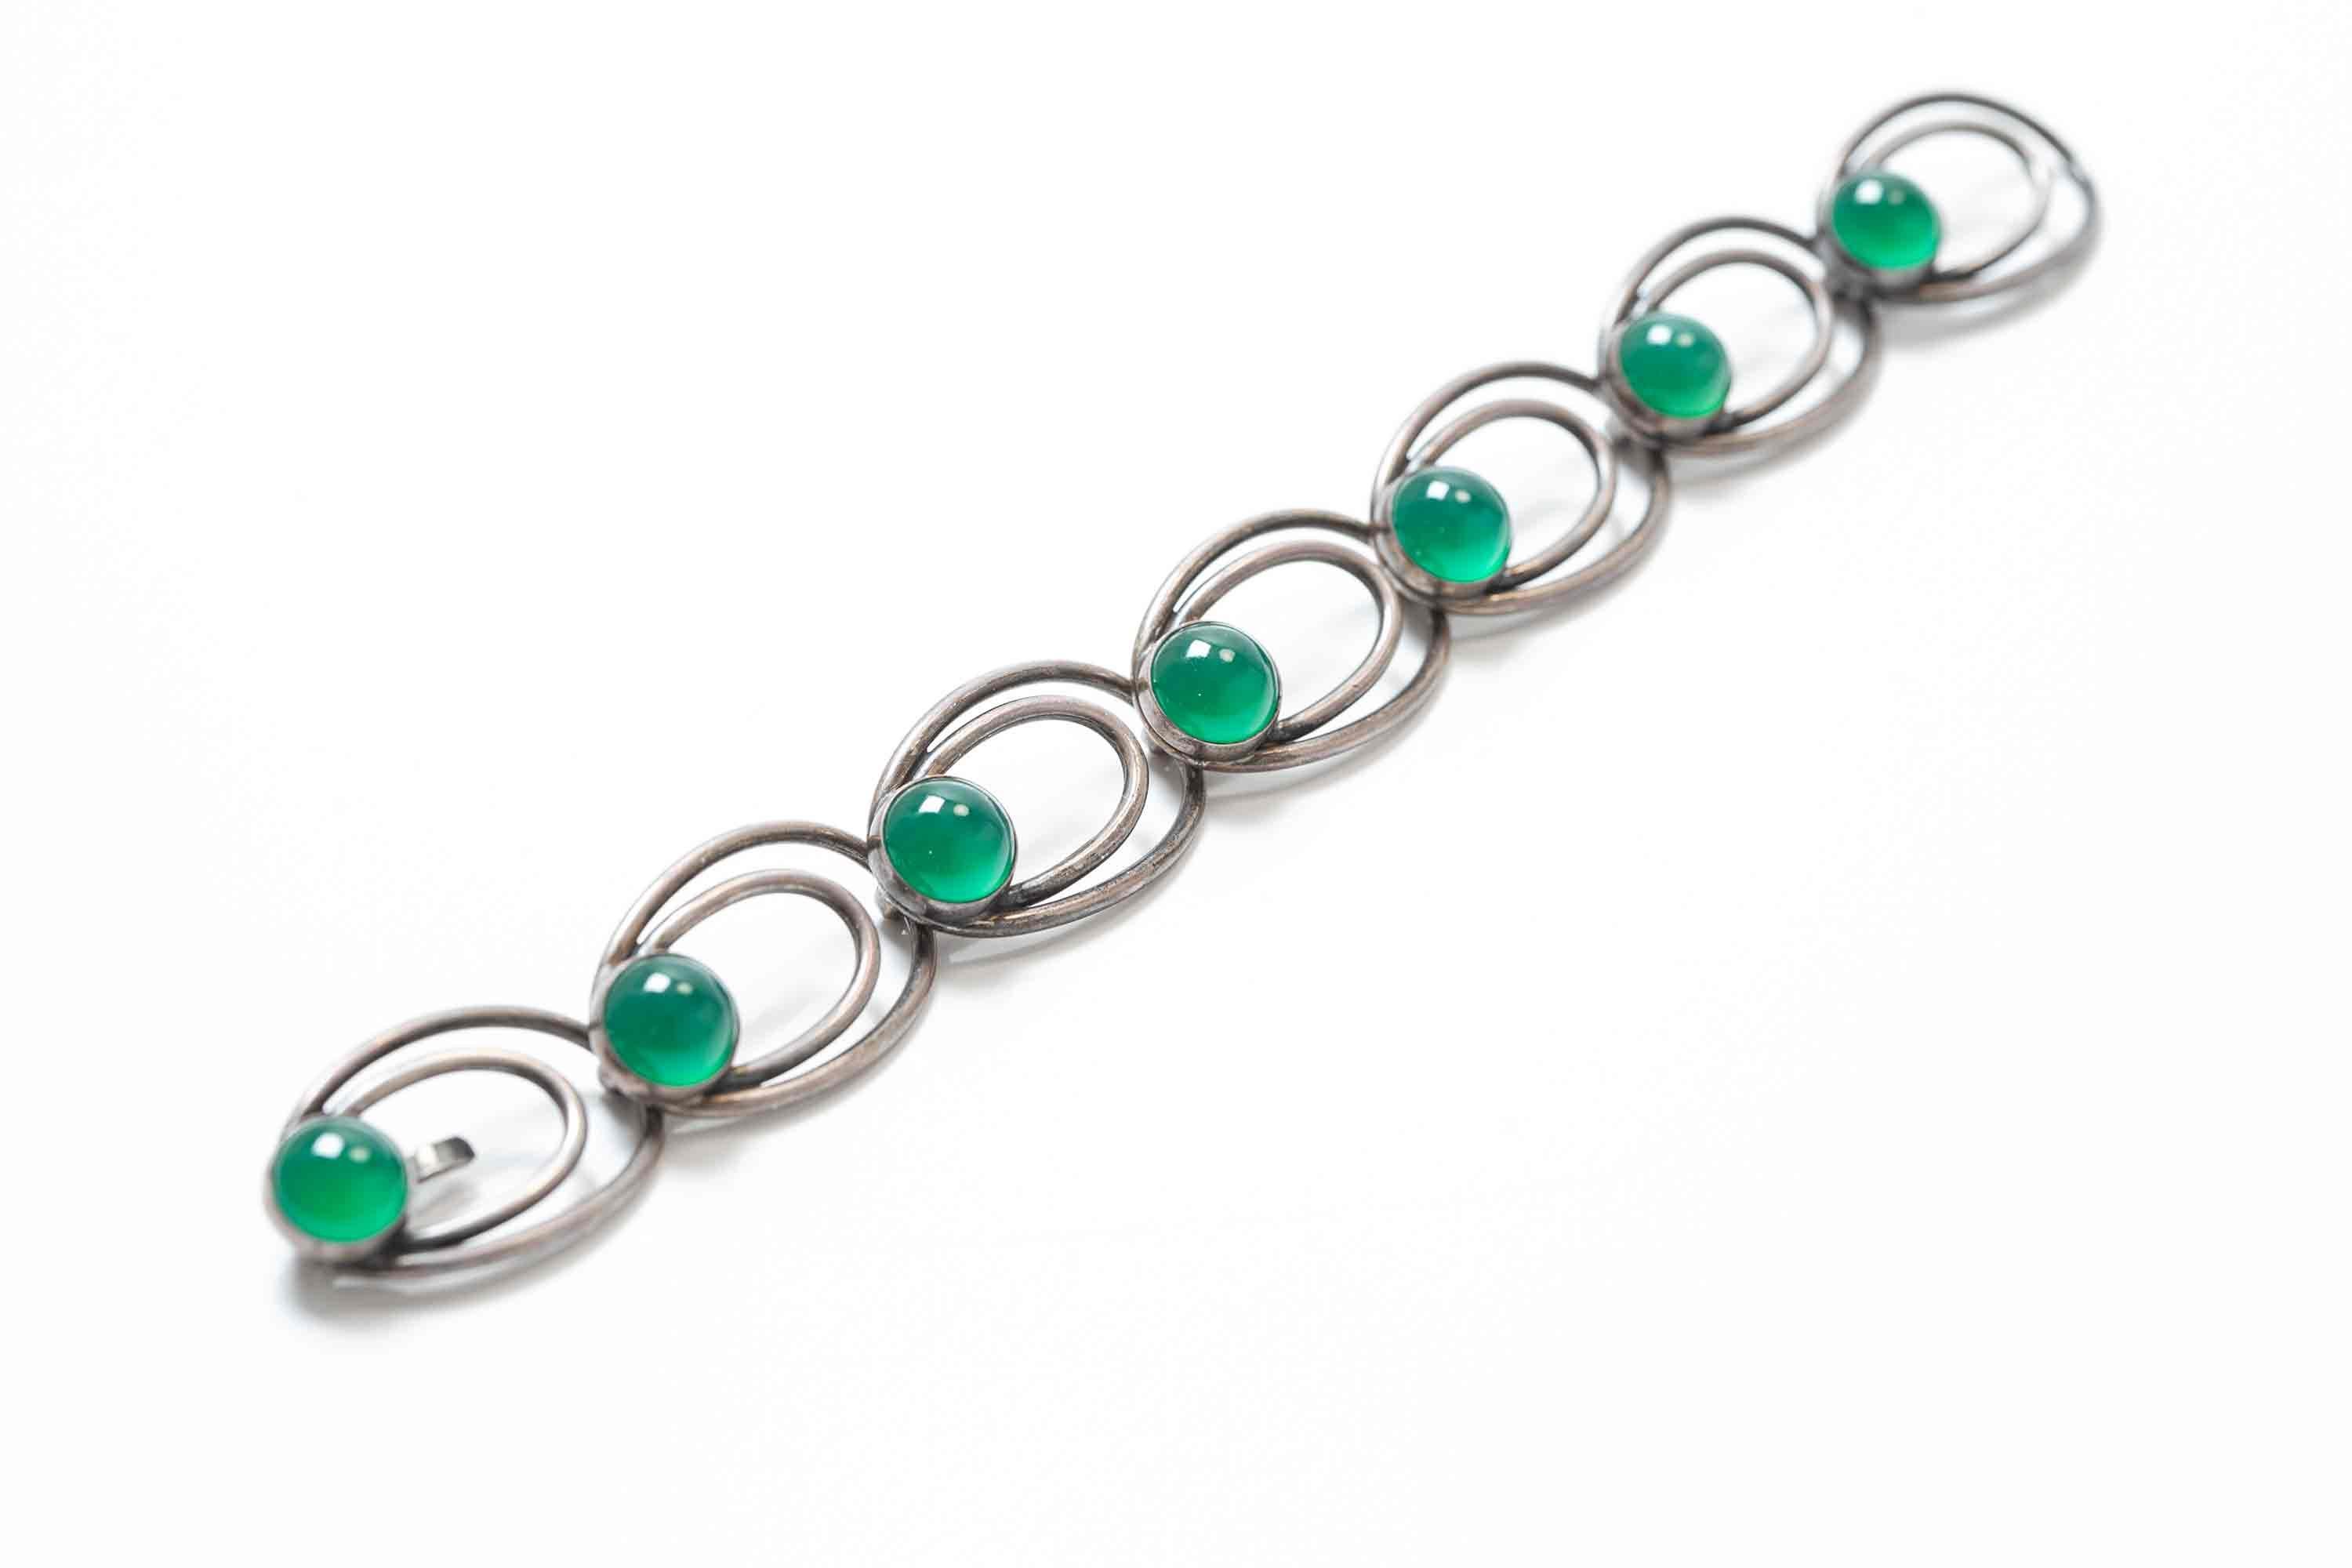 Elegant silver chain bracelet by danish designer and maker Nils Erik From. Silver with seven green agate stones. The bracelet is in excellent vintage condition, with no imperfections to its form.